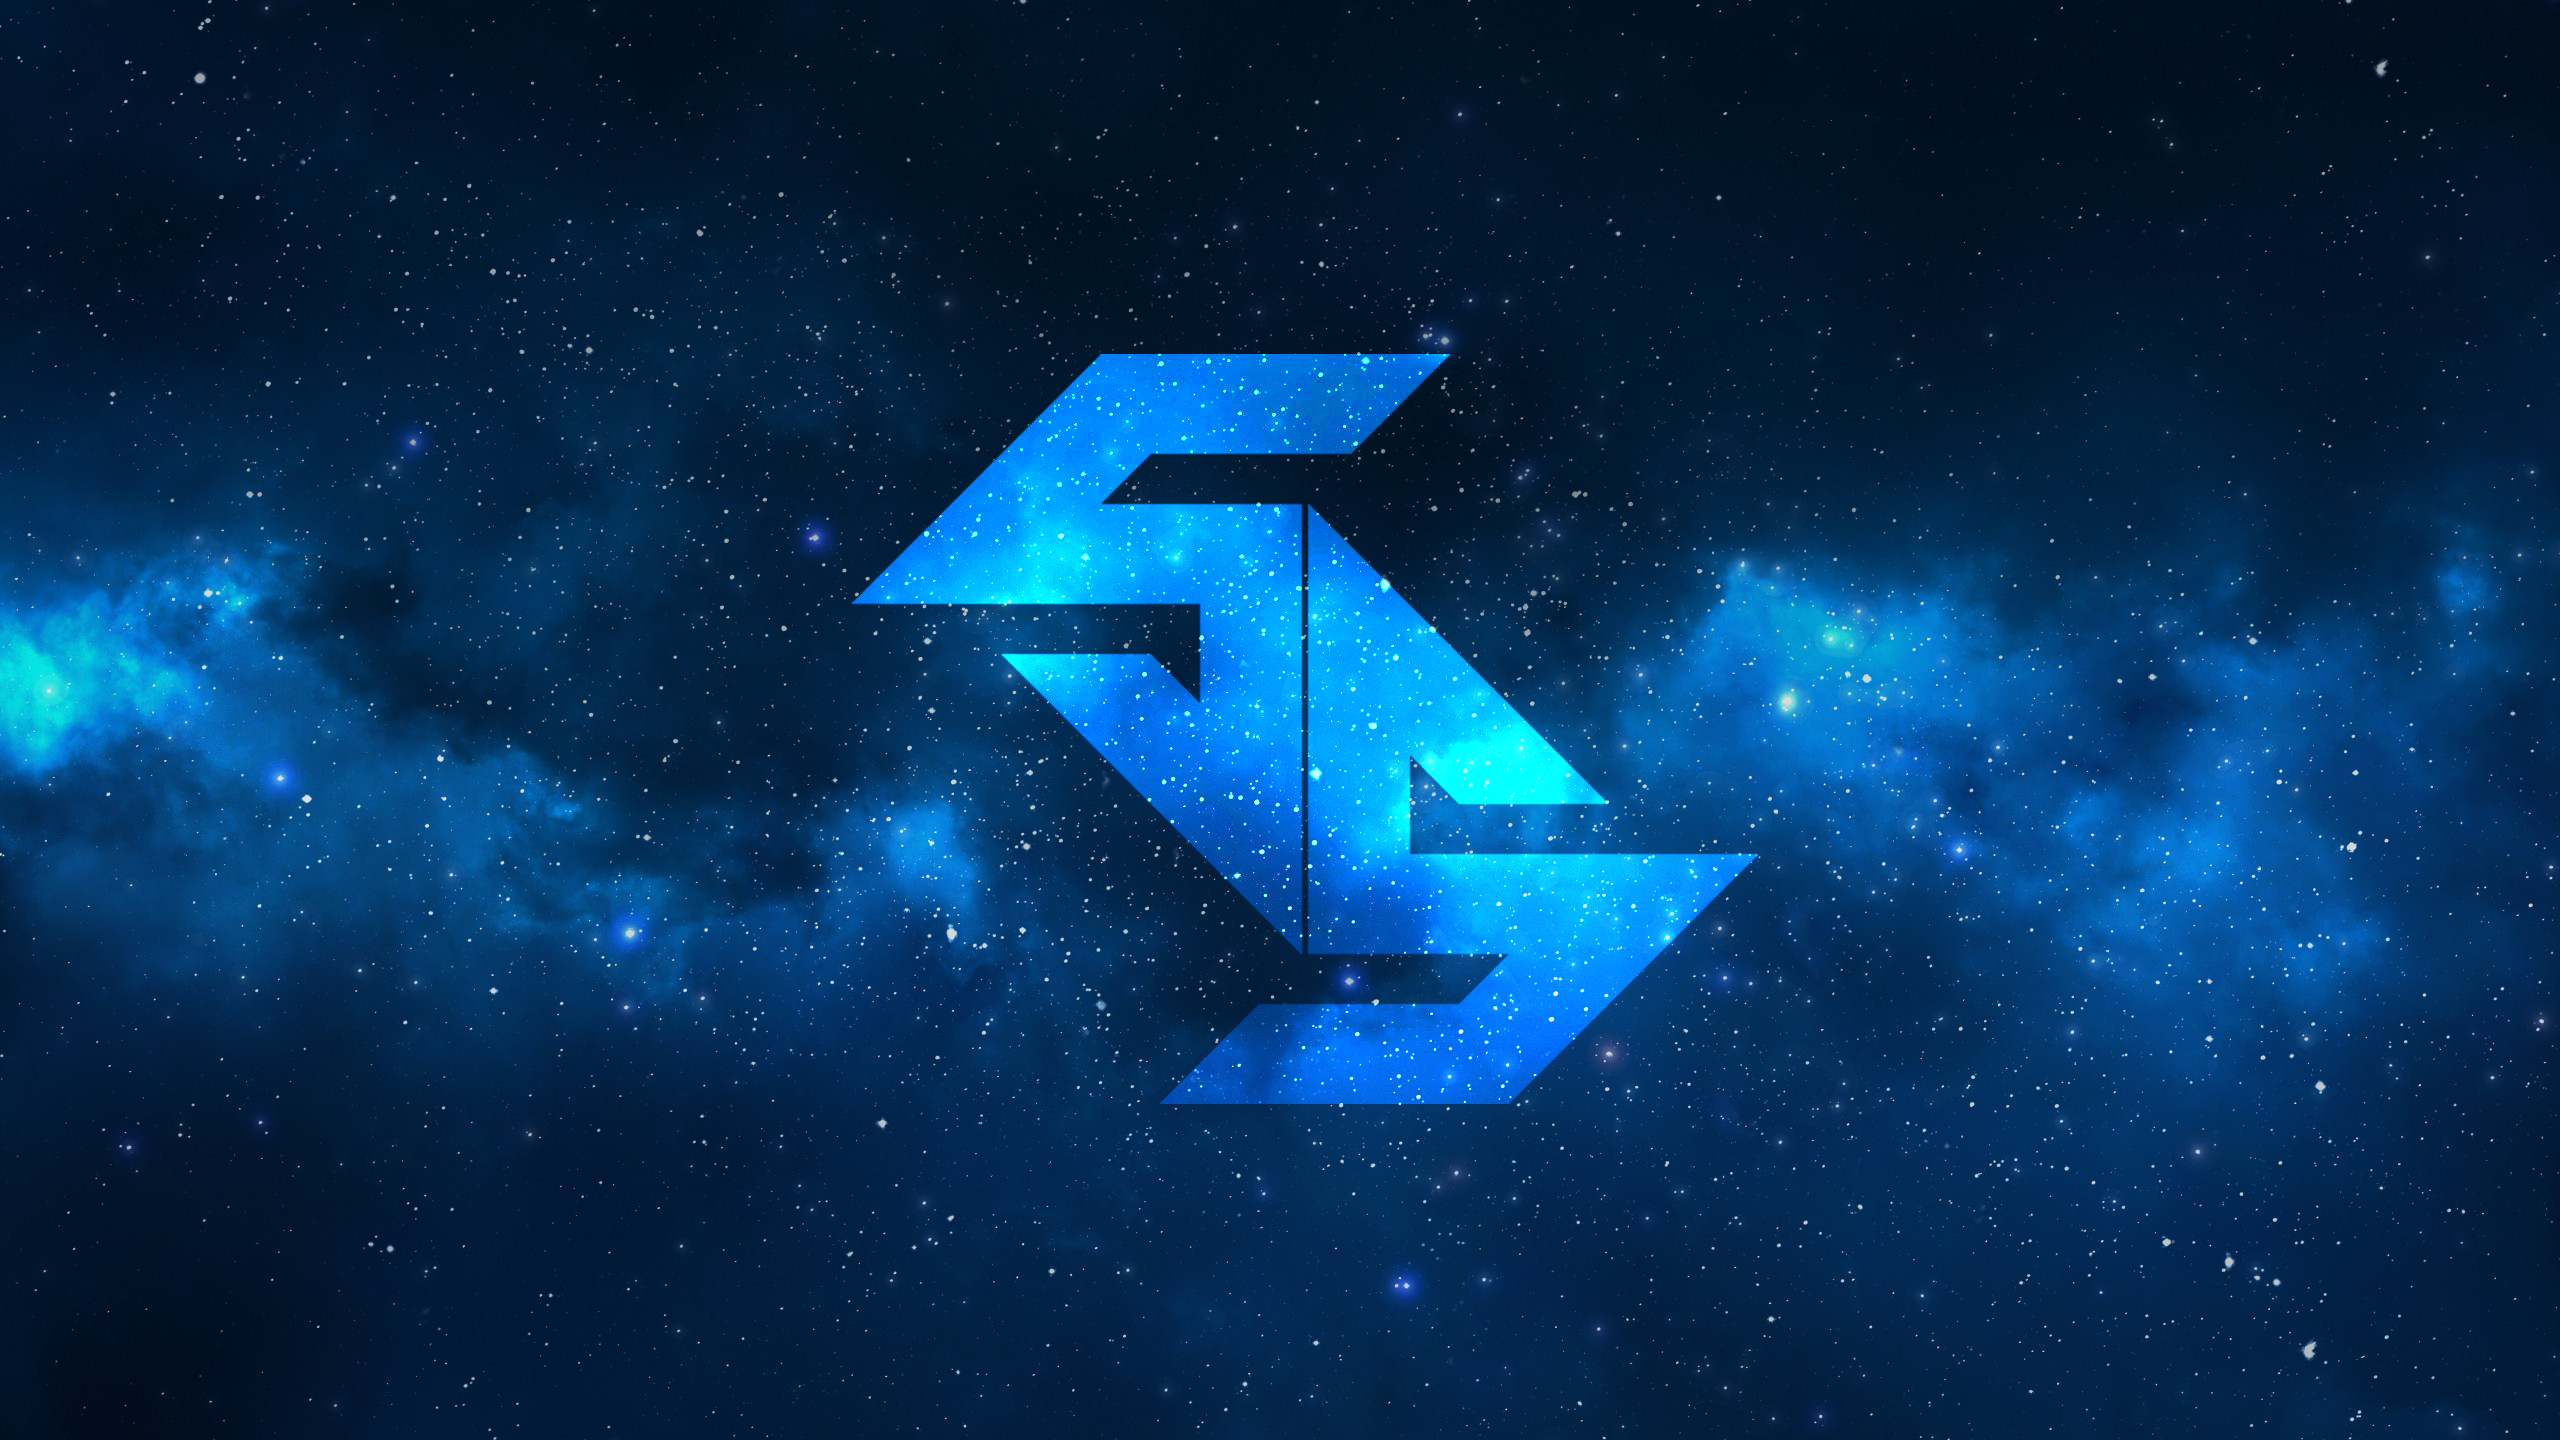 General 2560x1440 spes salutis Counter-Strike: Global Offensive galaxy blue PC gaming logo space